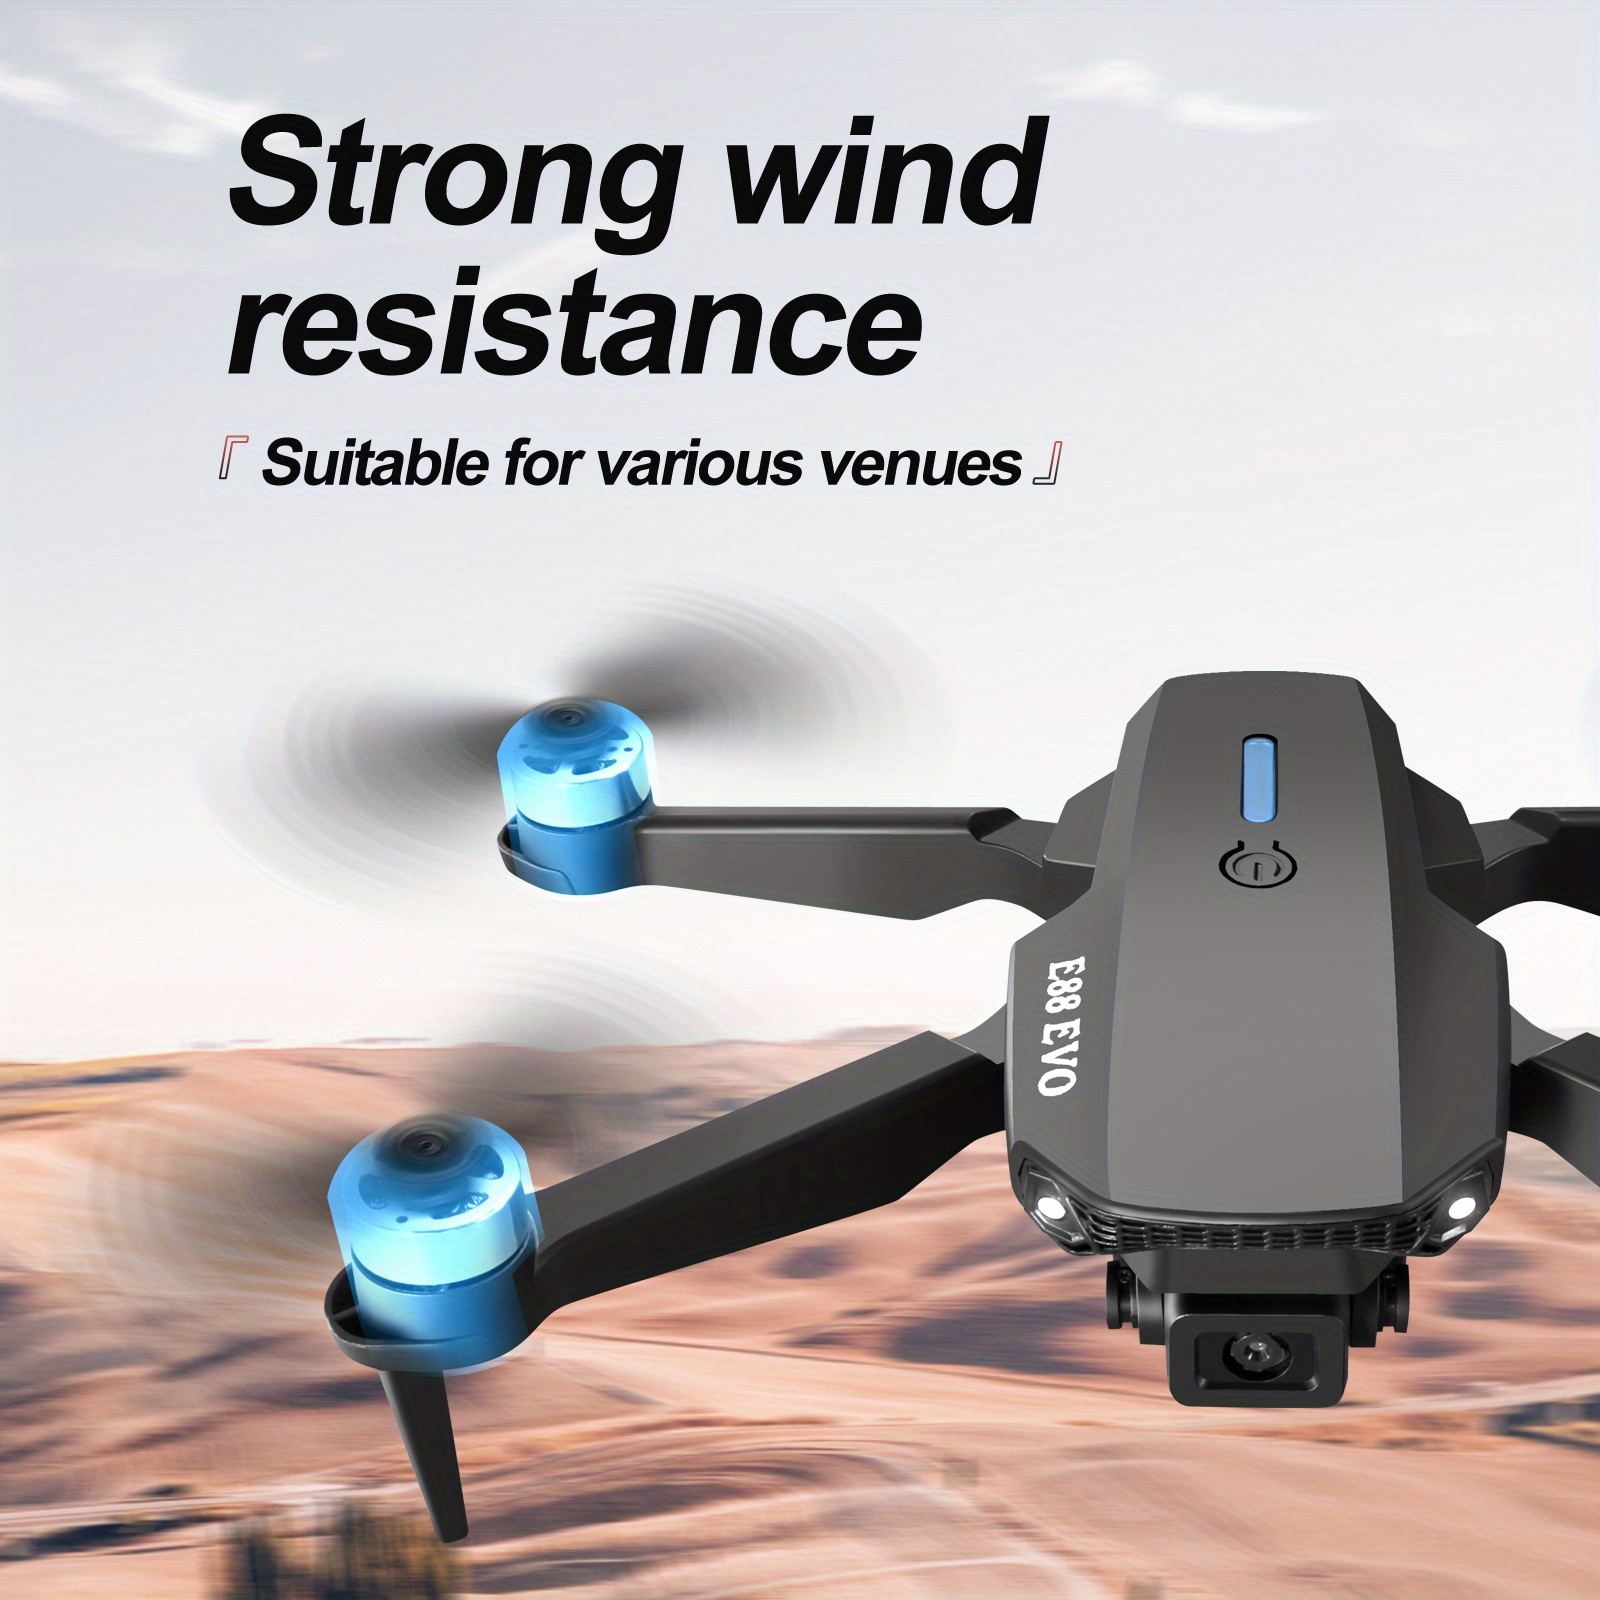 new e88 evo rc drone sd dual camera optical fow brushless motor intelligent follow trajectory flight gesture photography wifi fpv foldable quadcopter battery 2 3 optional for teenage model hobbies details 6